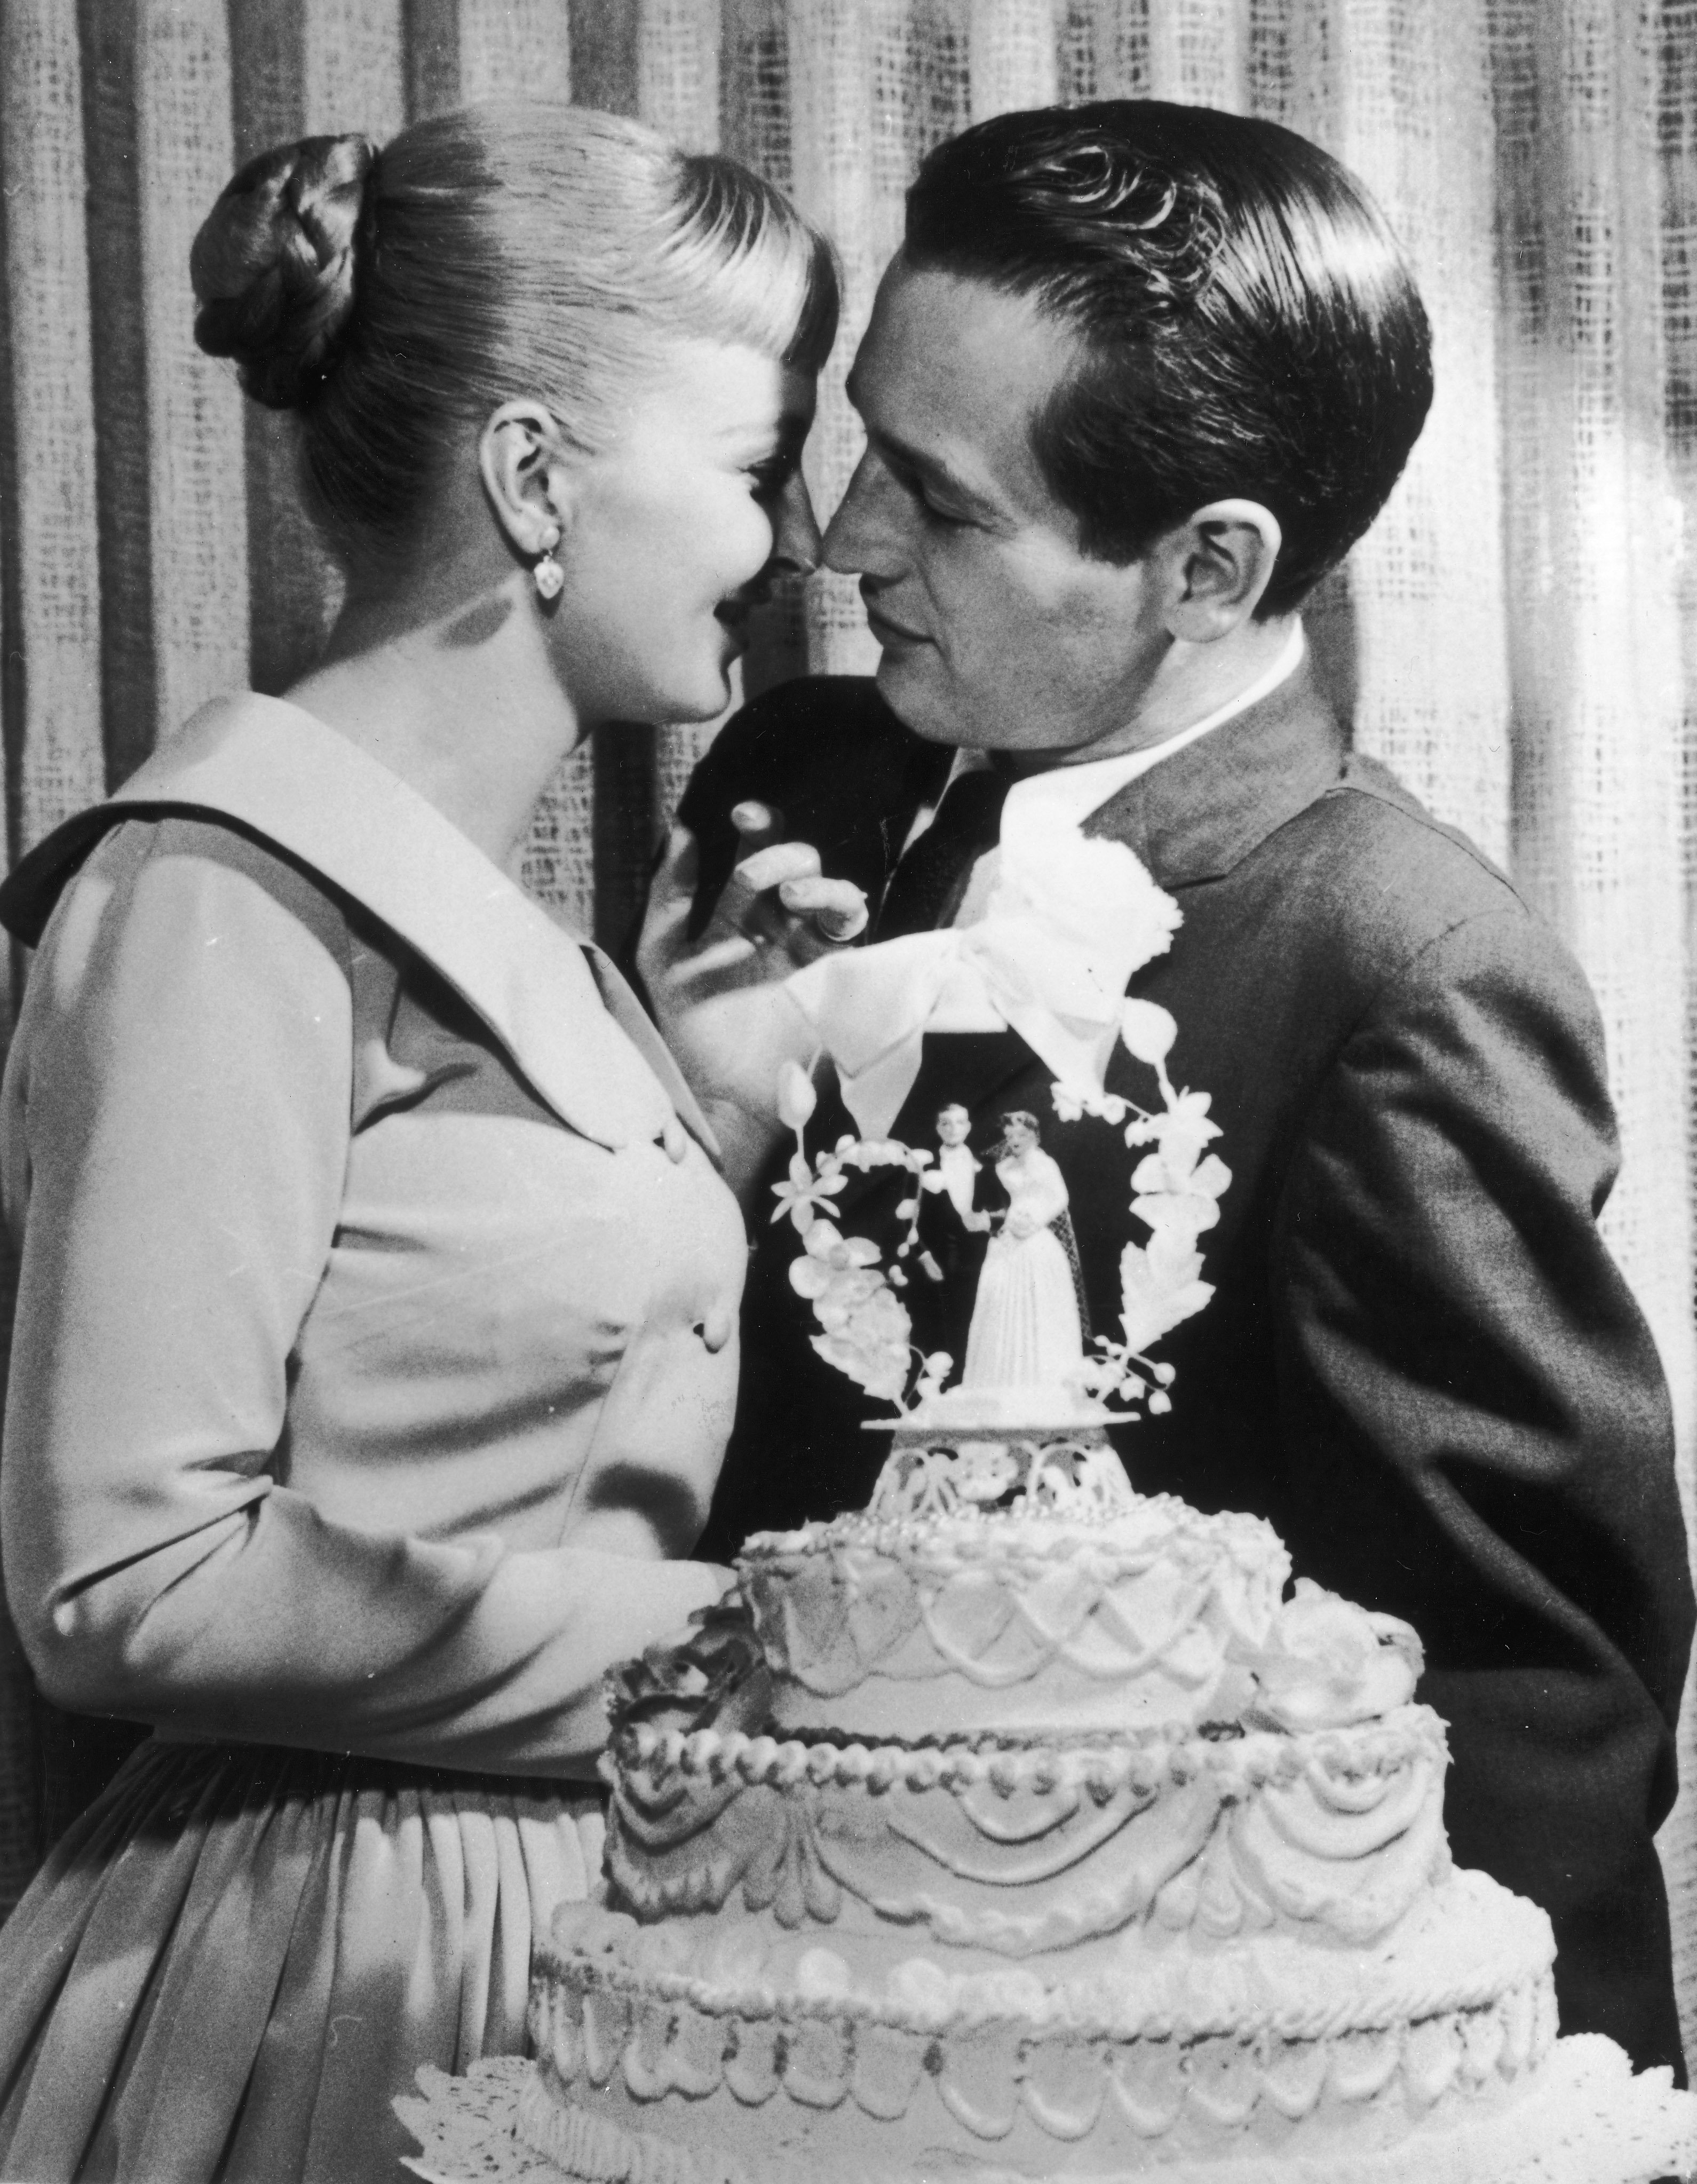 Newlyweds Paul Newman and Joanne Woodward kiss behind a wedding cake during their wedding reception at the El Rancho hotel-casino, Las Vegas, Nevada, January 29, 1958 | Photo: Getty Images